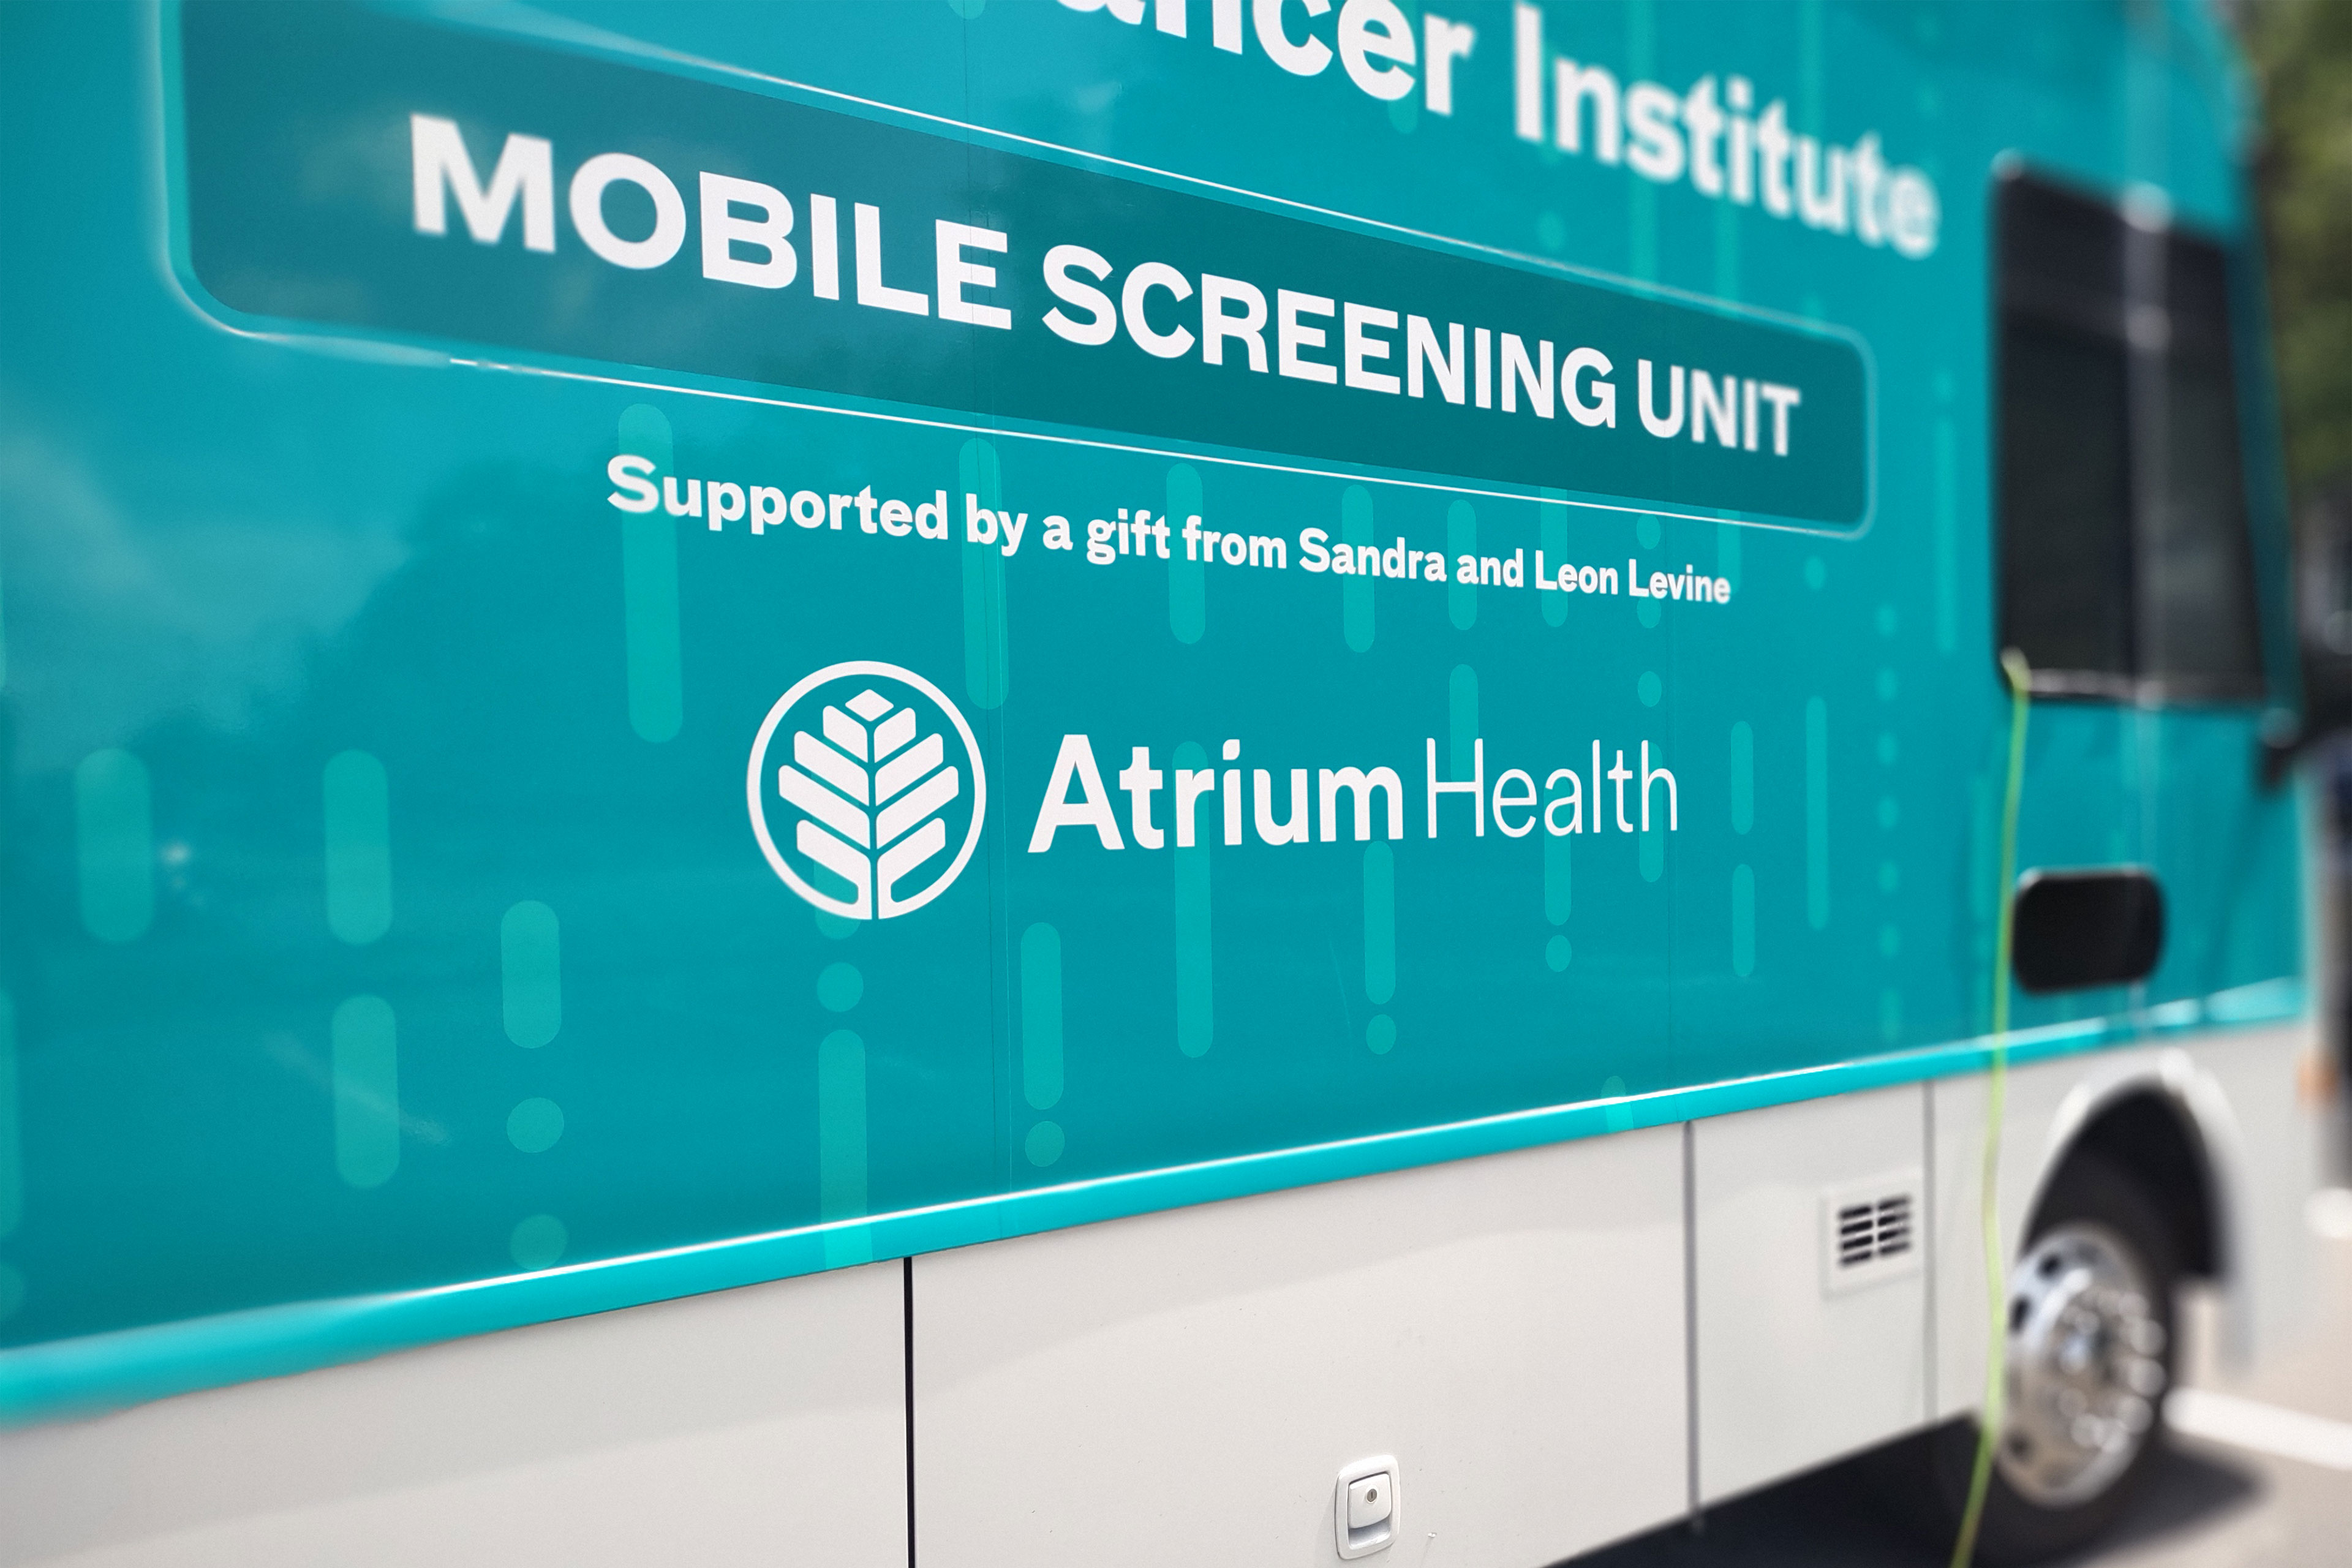 A photo shows the outside of a green bus with the Atrium Health logo and text that reads, "Mobile screening unit."